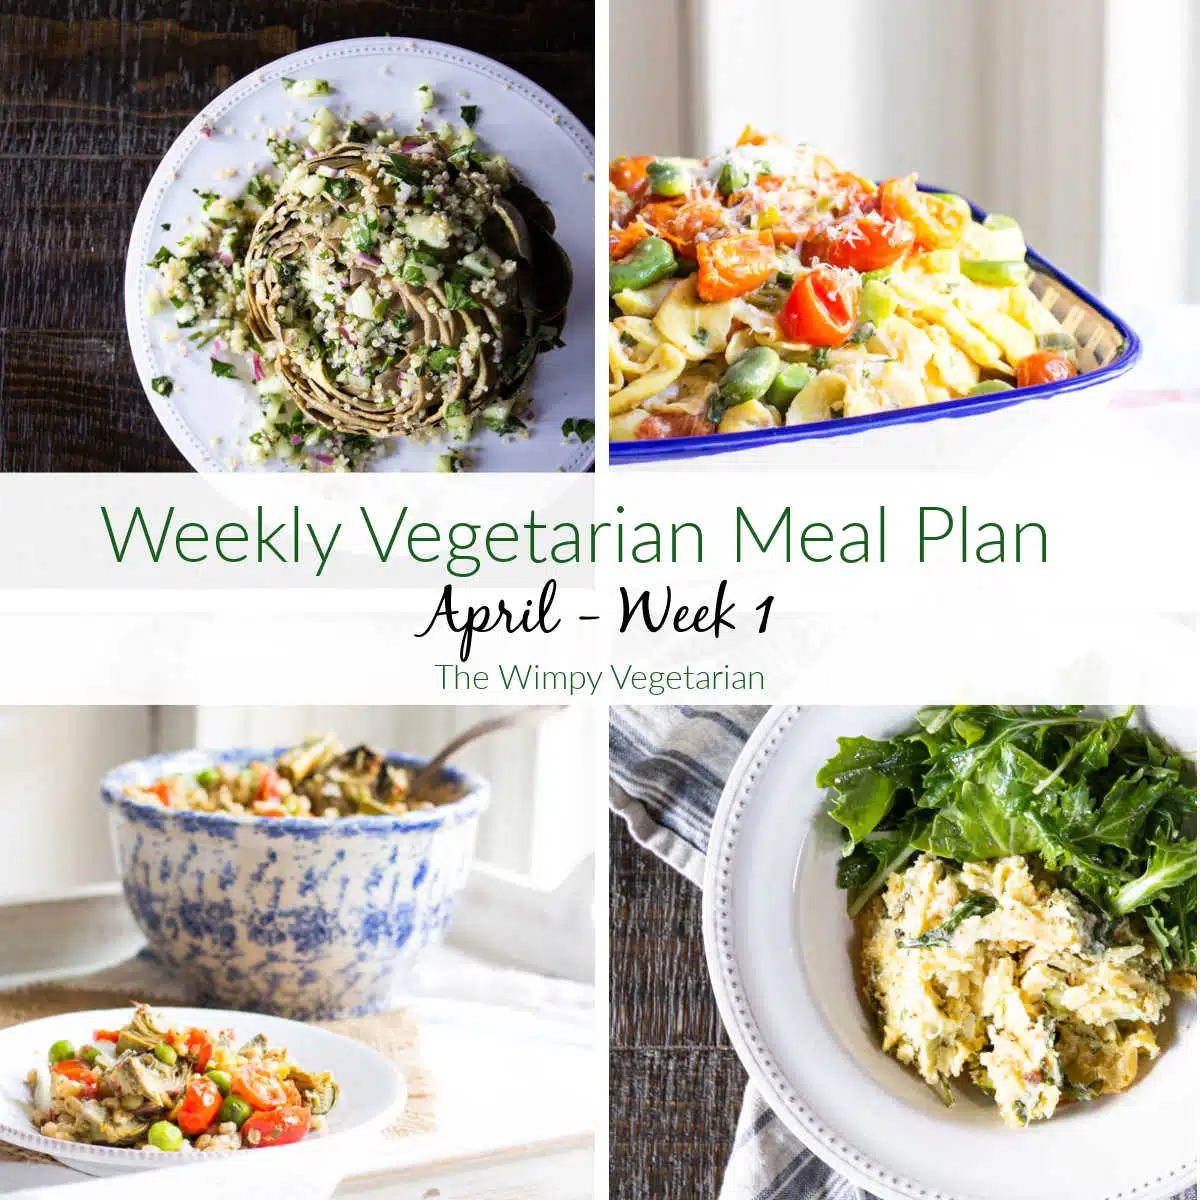 Four dishes from a vegetarian weekly meal plan, including an egg bake, barley pilaf, and stuffed artichoke, with text overlay.